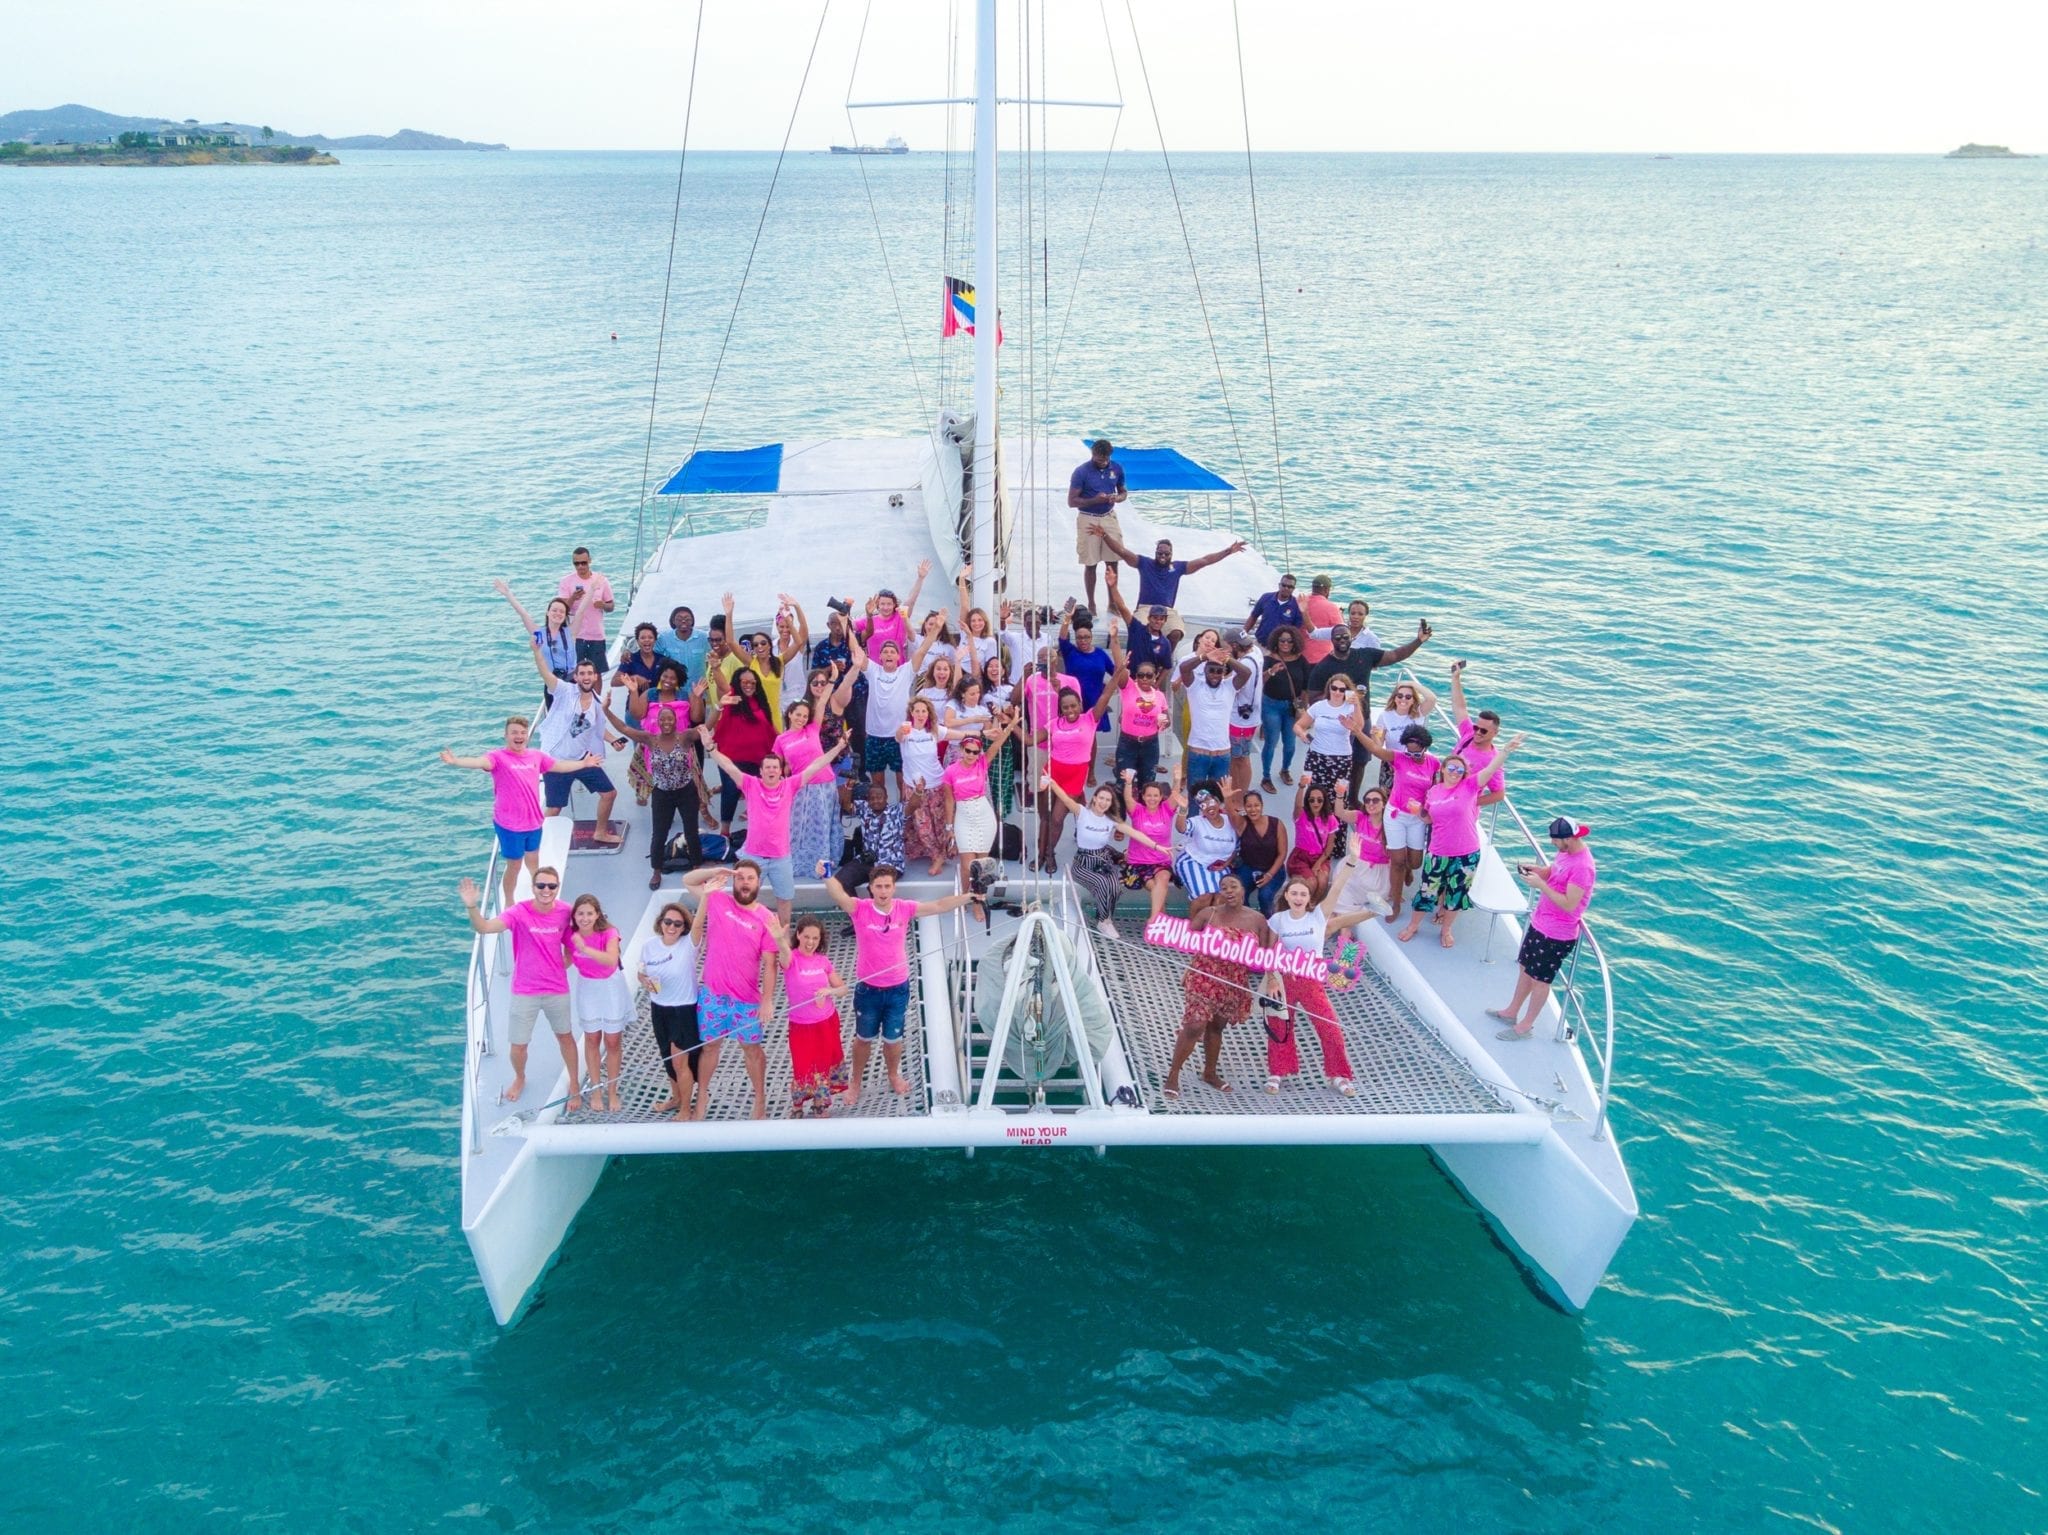 In a drone shot, a few dozen people, some wearing bright pink t-shirts, pose with their arms in the air on a large catamaran in Antigua. The sea surrounding them is turquoise.